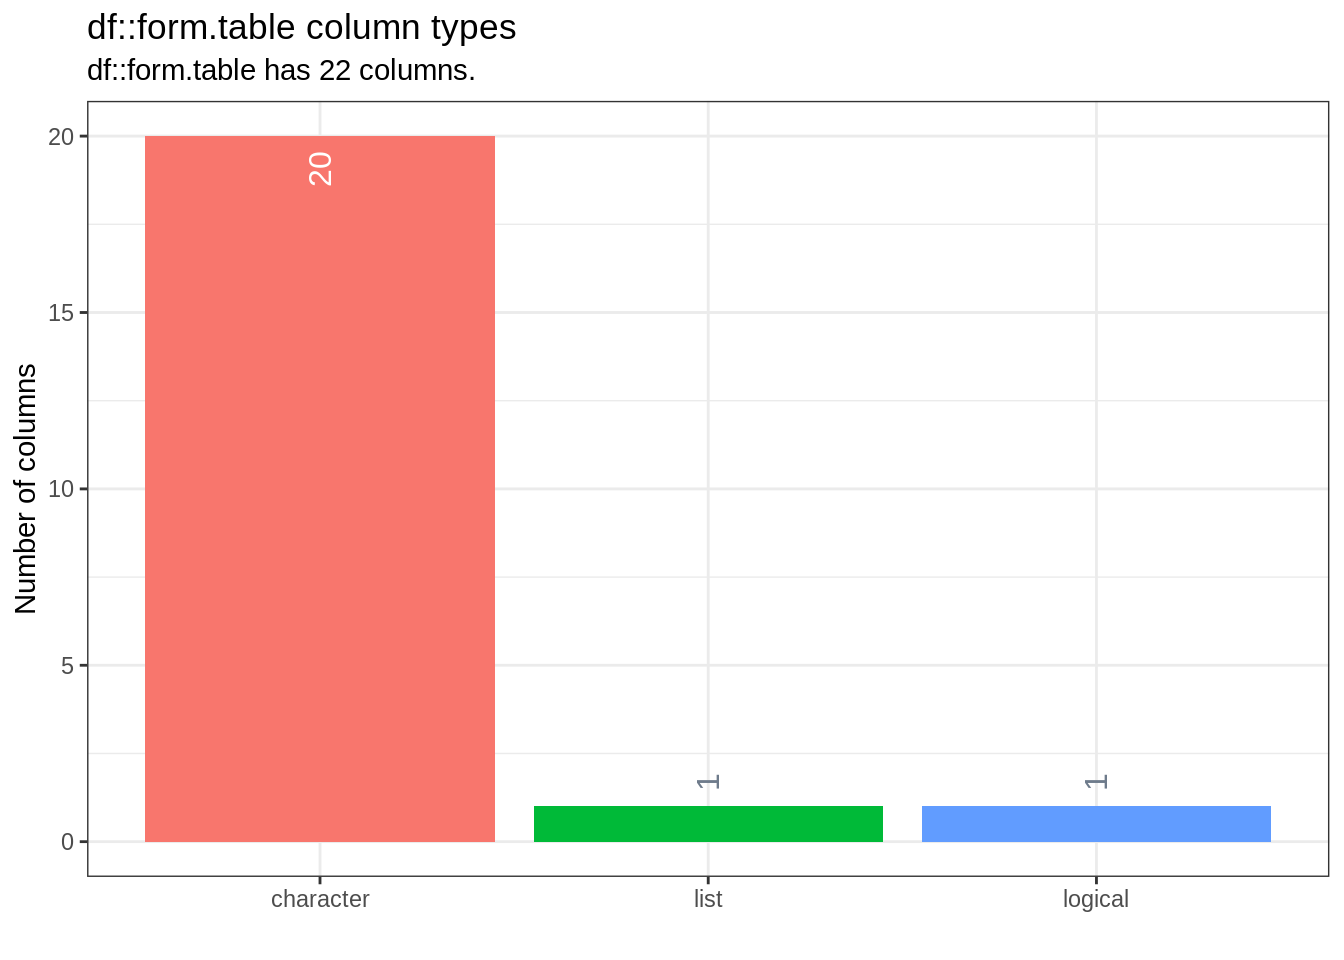 The column types in the data frame